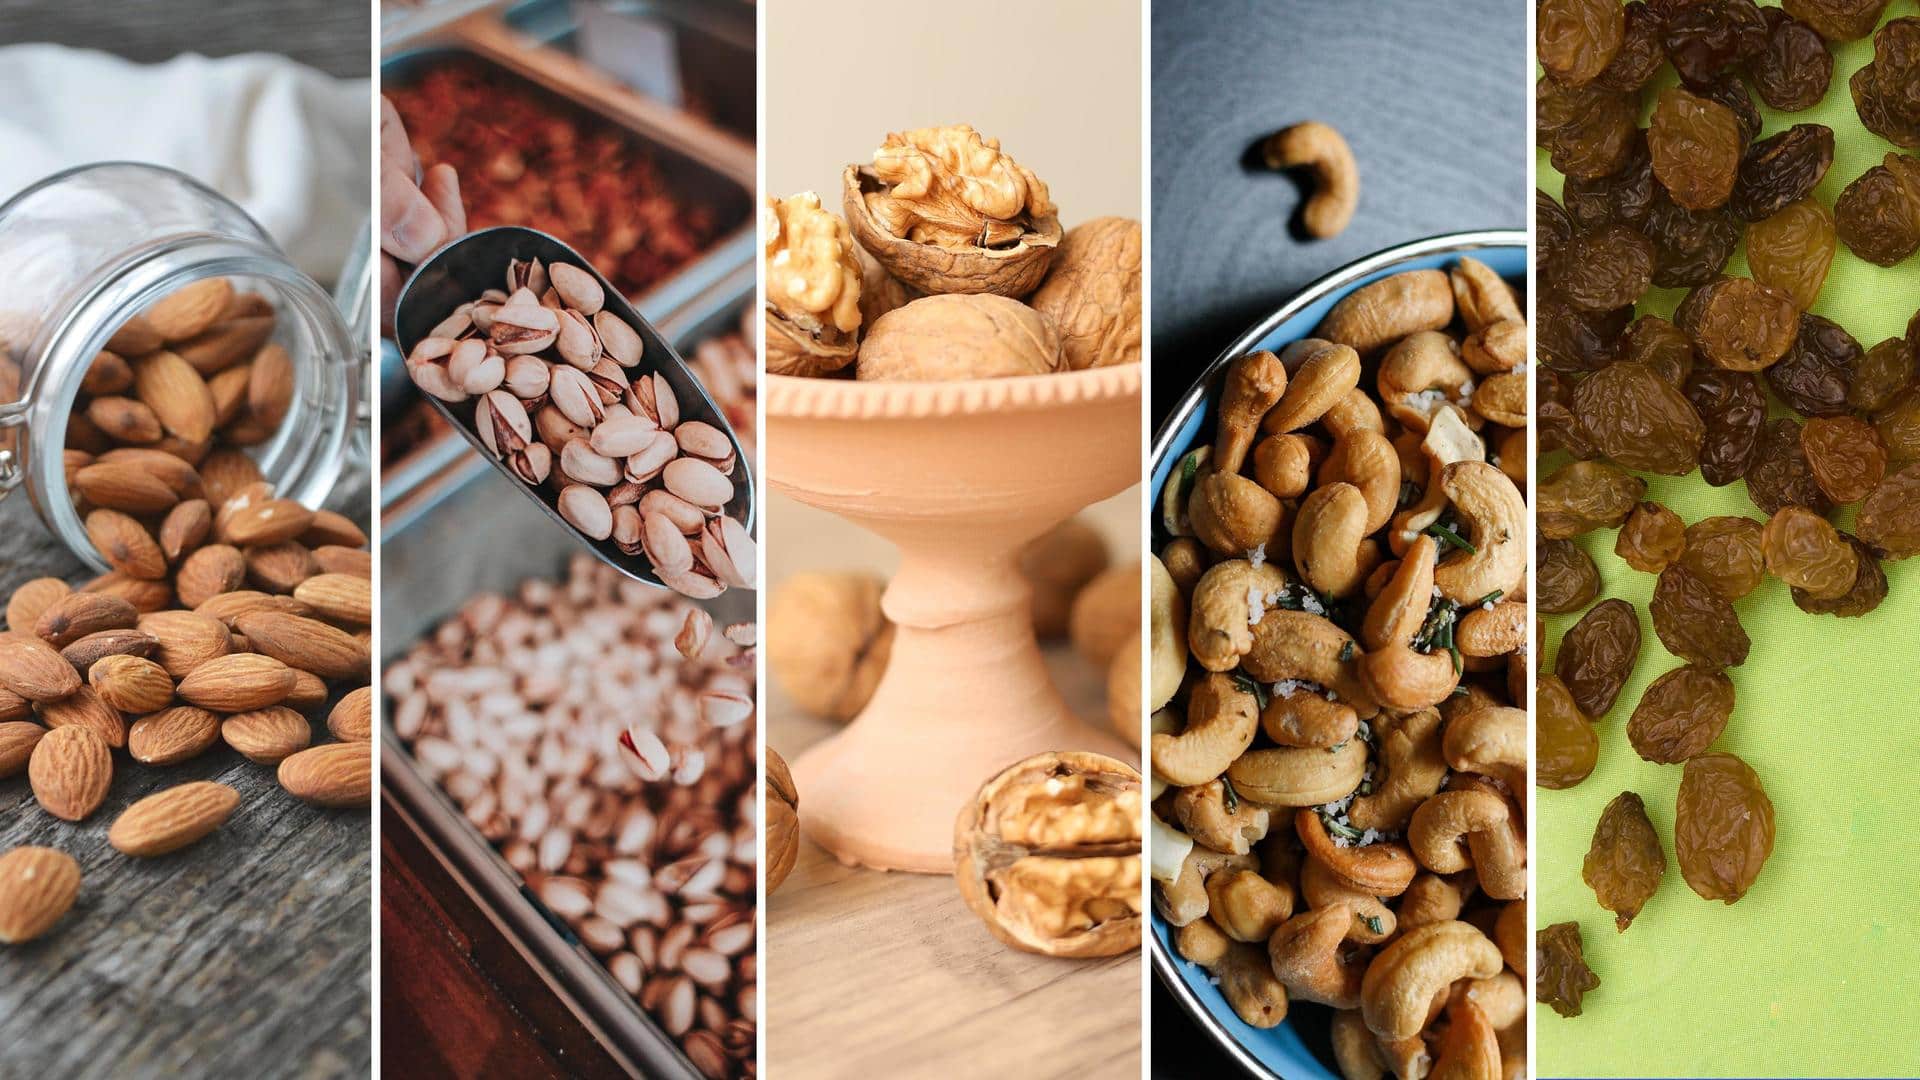 Stay warm this winter by chomping on these dry fruits